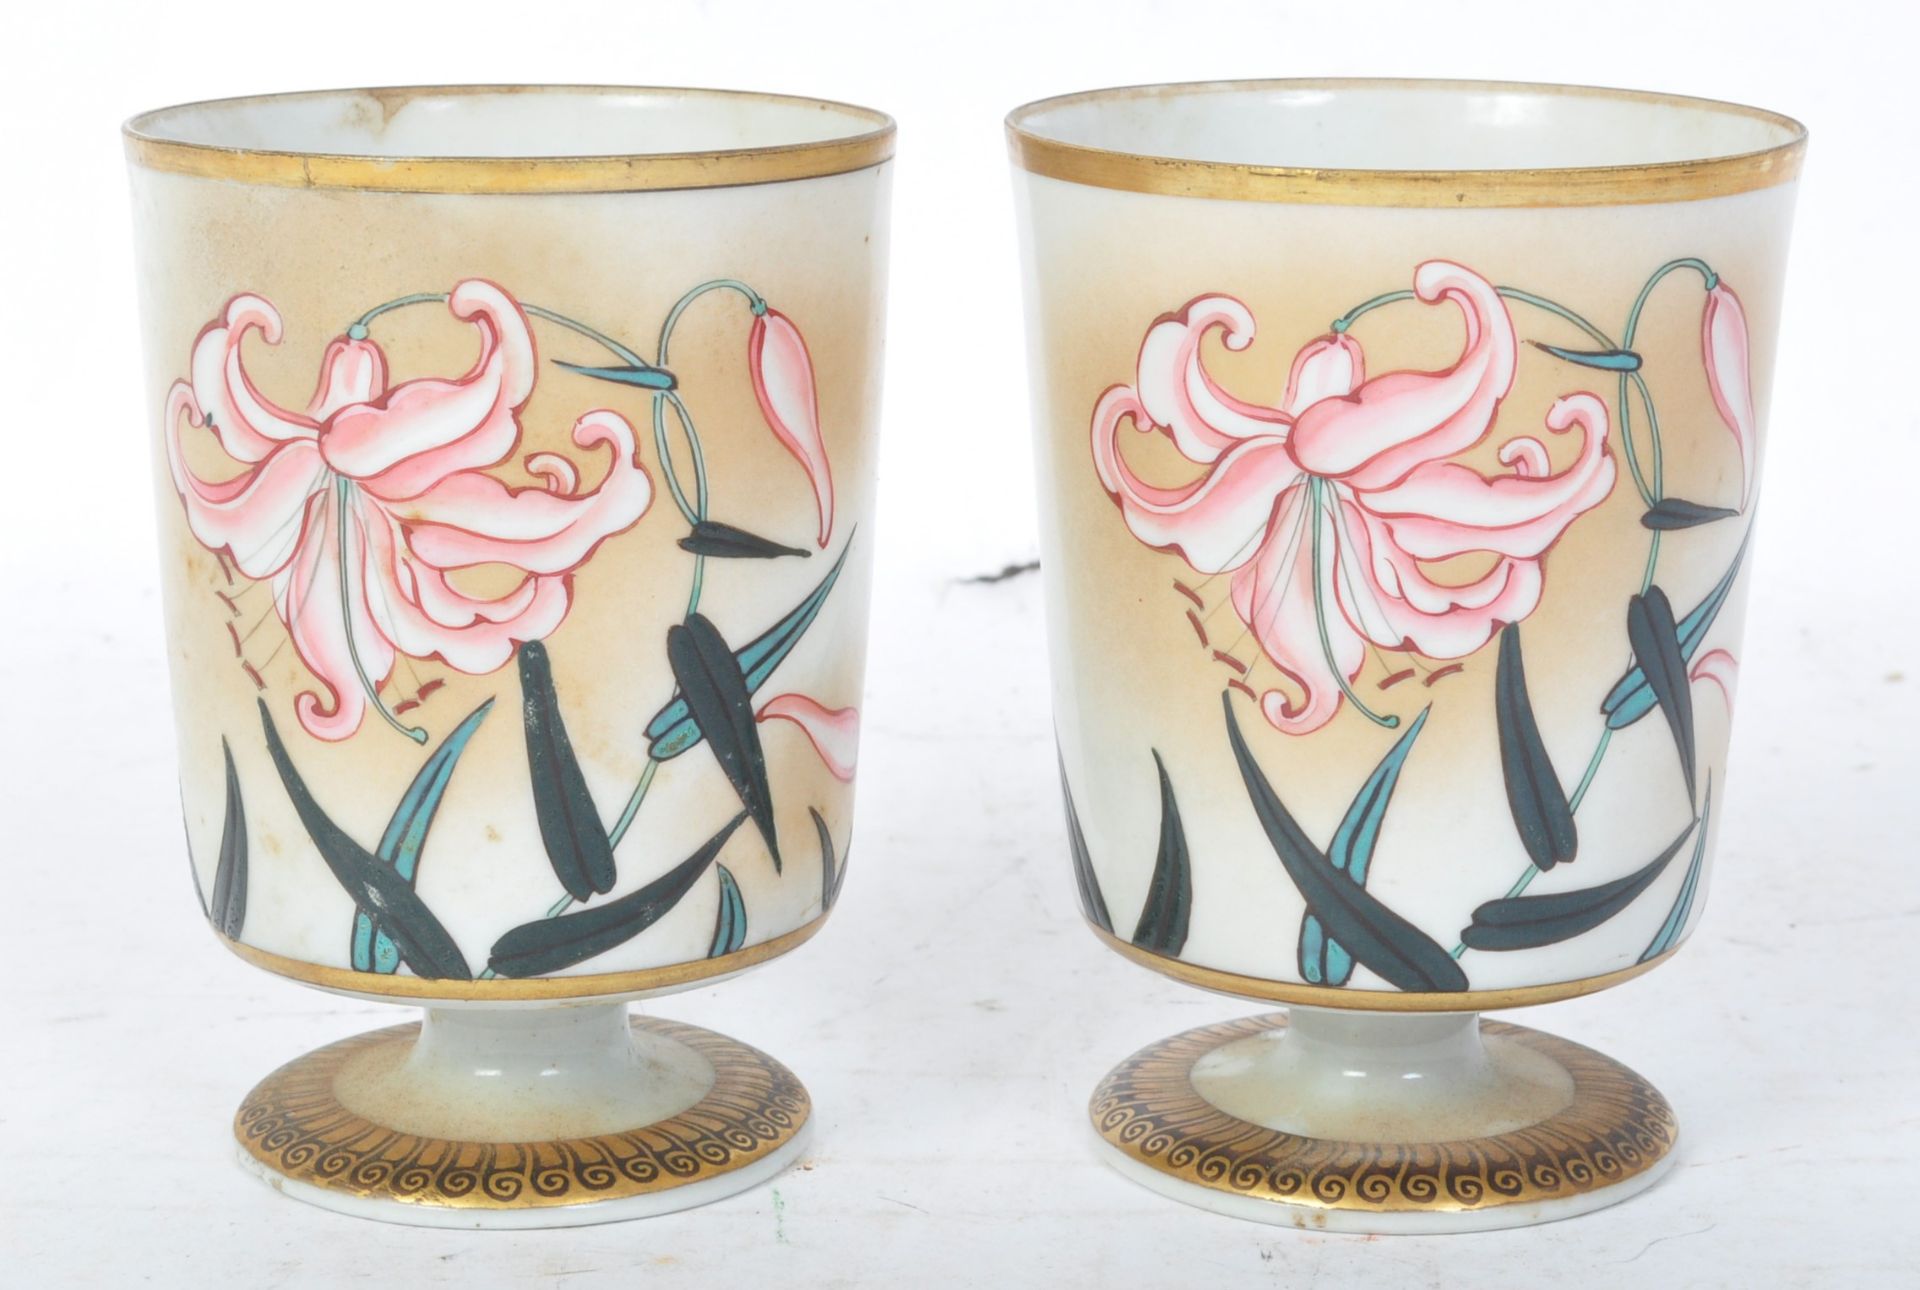 EARLY 20TH CENTURY JAPANESE HAND PAINTED PORCELAIN GOBLET